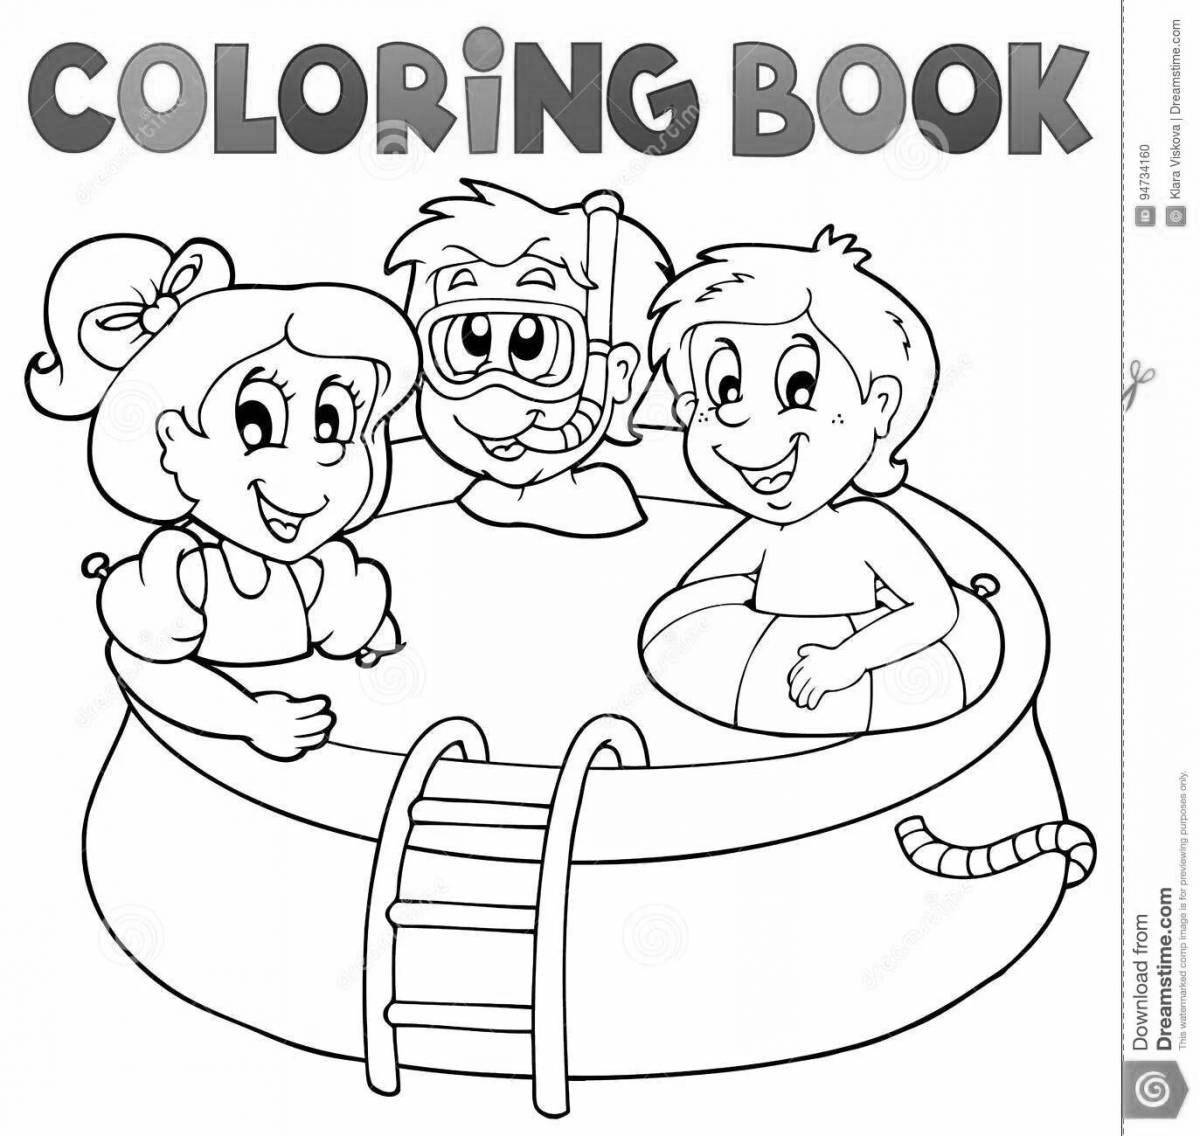 Exciting swimming pool coloring book for kids